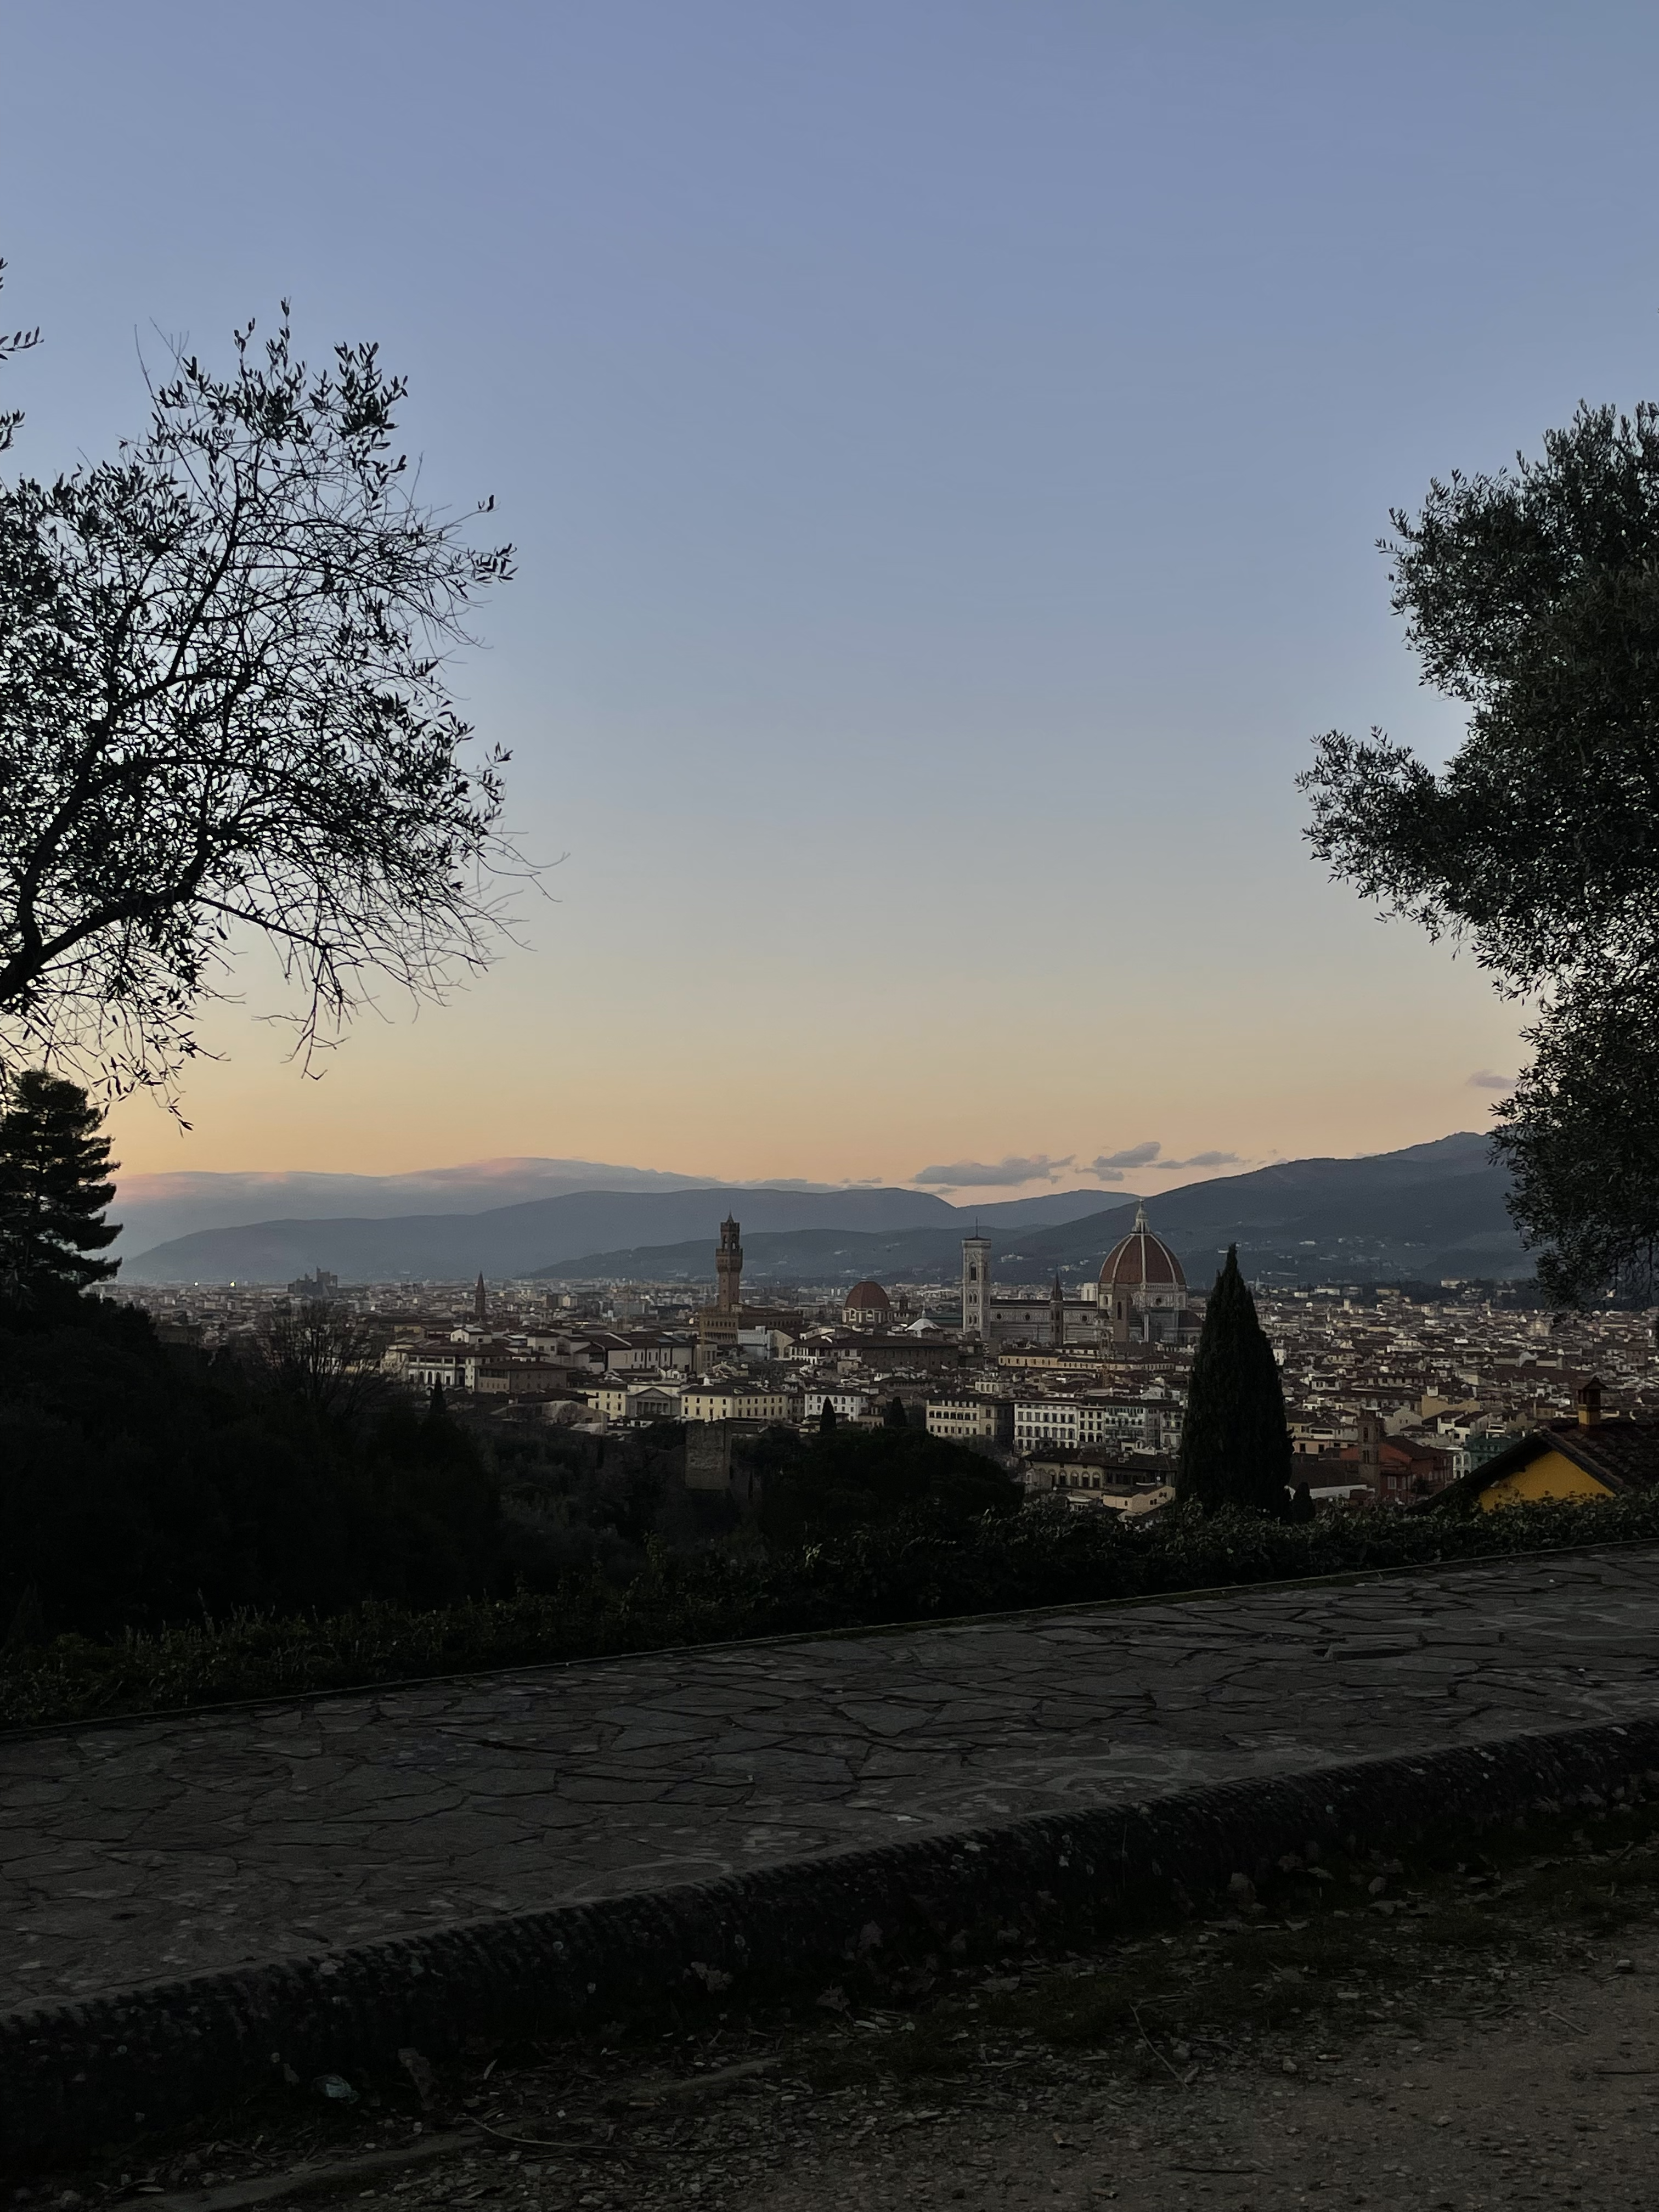 "View from Piazza Michelangelo over all of Florence" by Shayna Martin